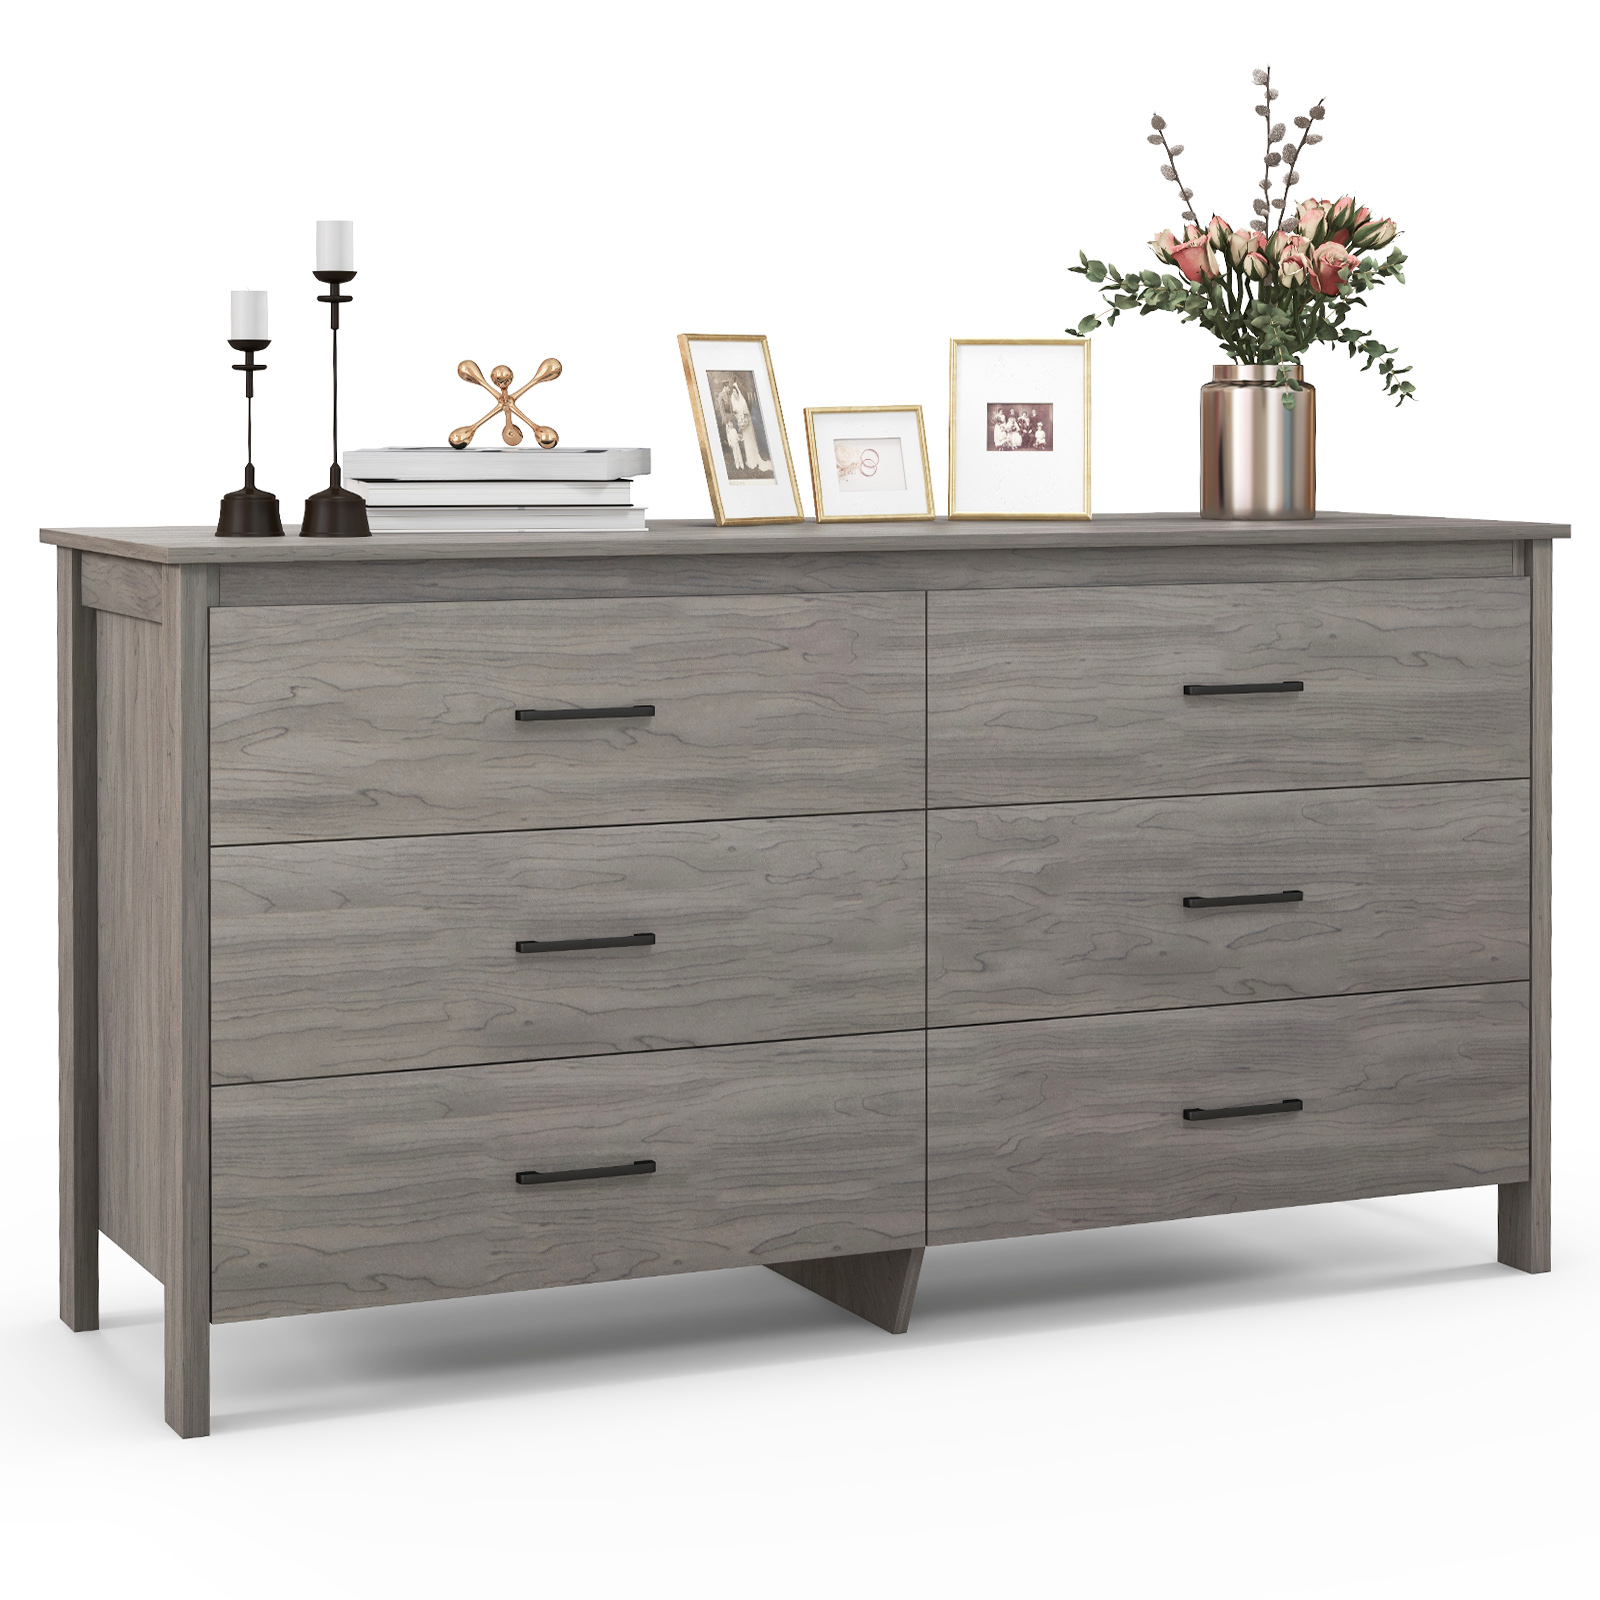 6-Drawer Dresser Cabinet with Center Support and Anti-tip Kit-Grey